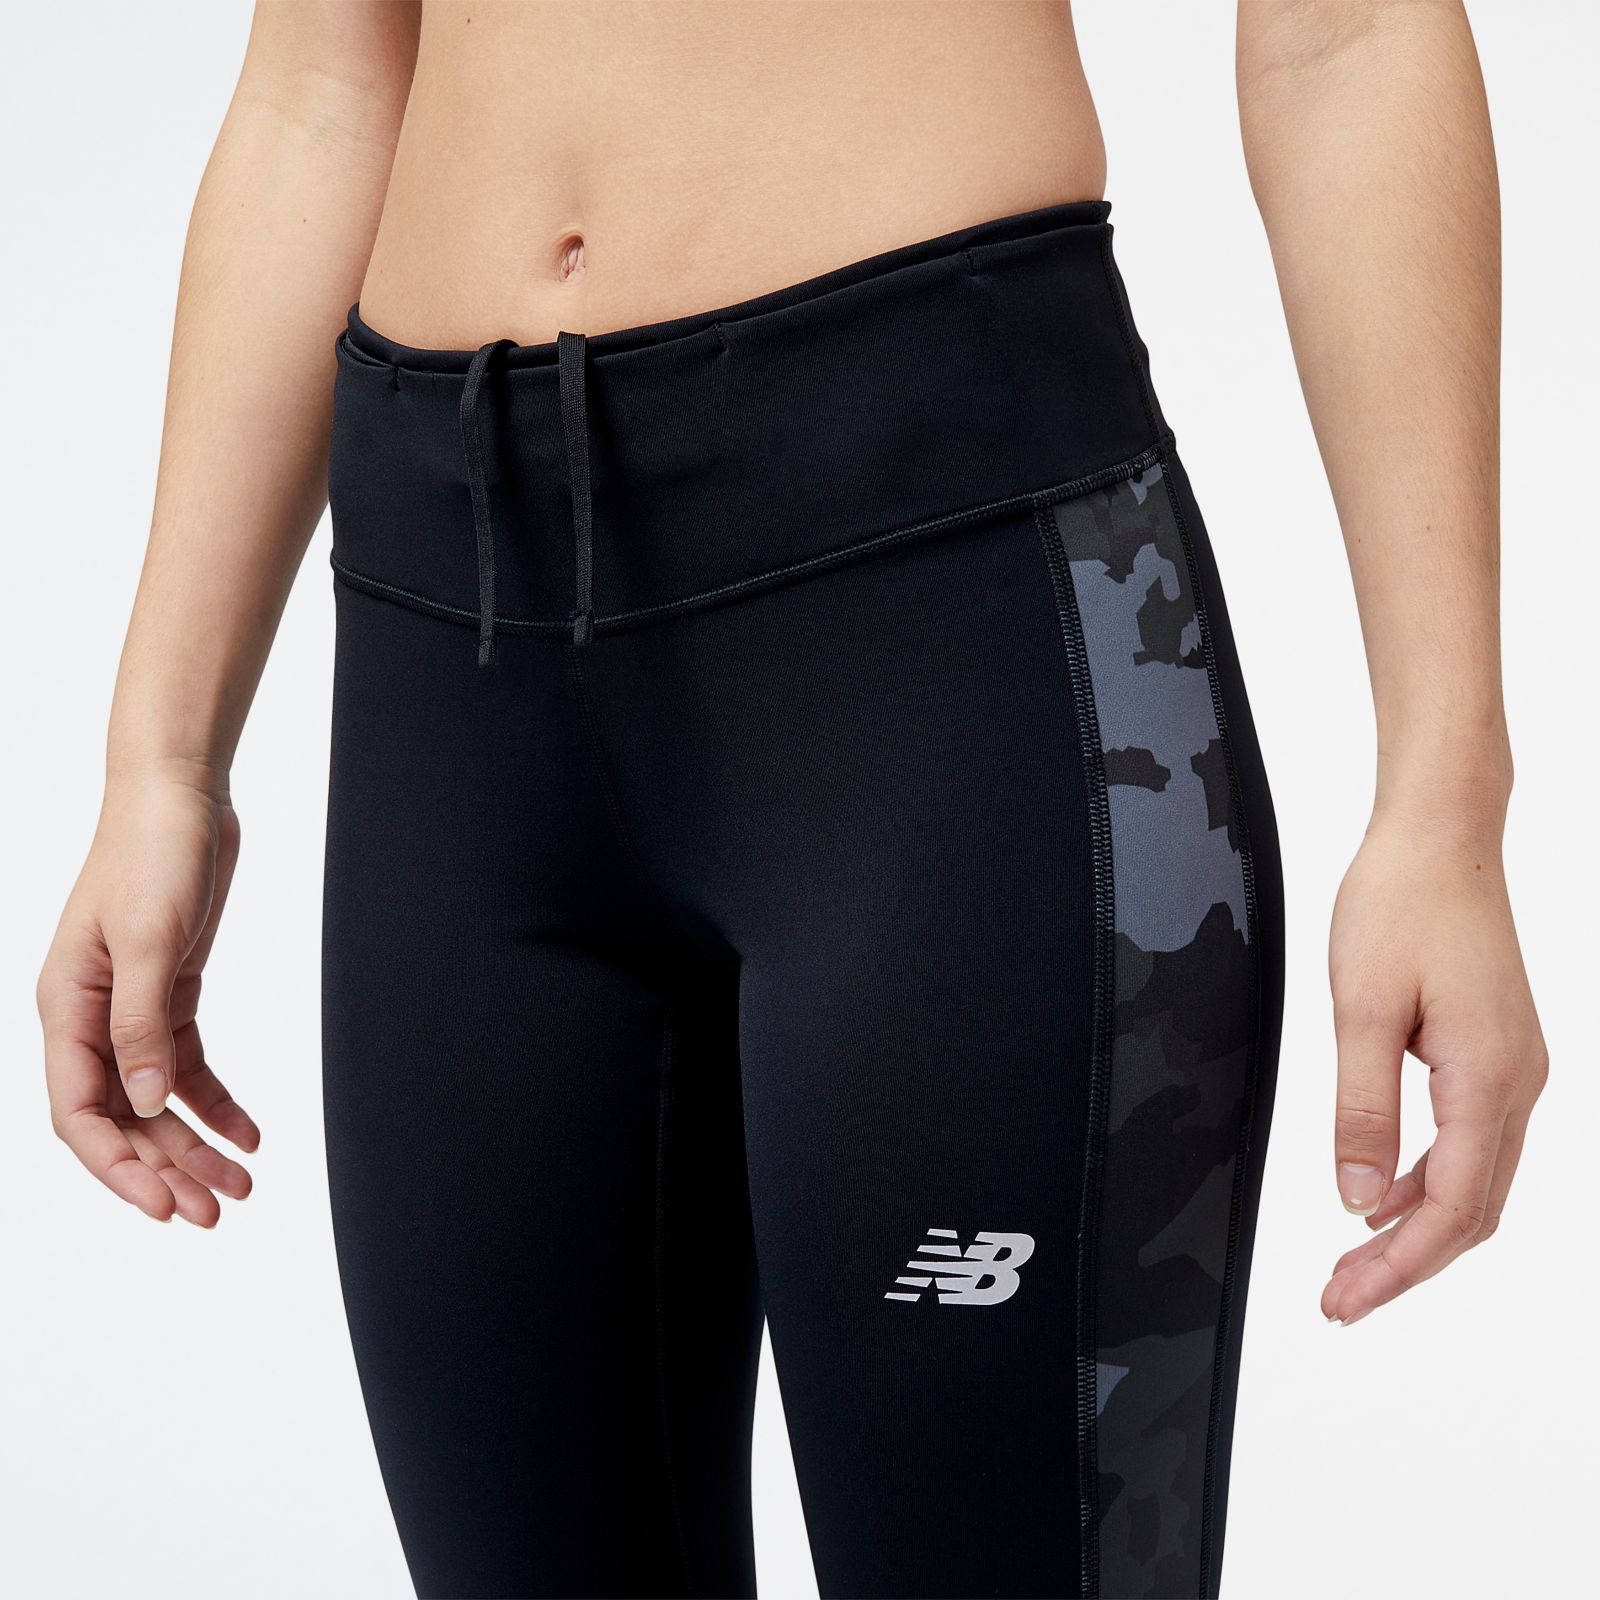 New Balance Mens Reflective Accelerate Tight - Sport from   UK